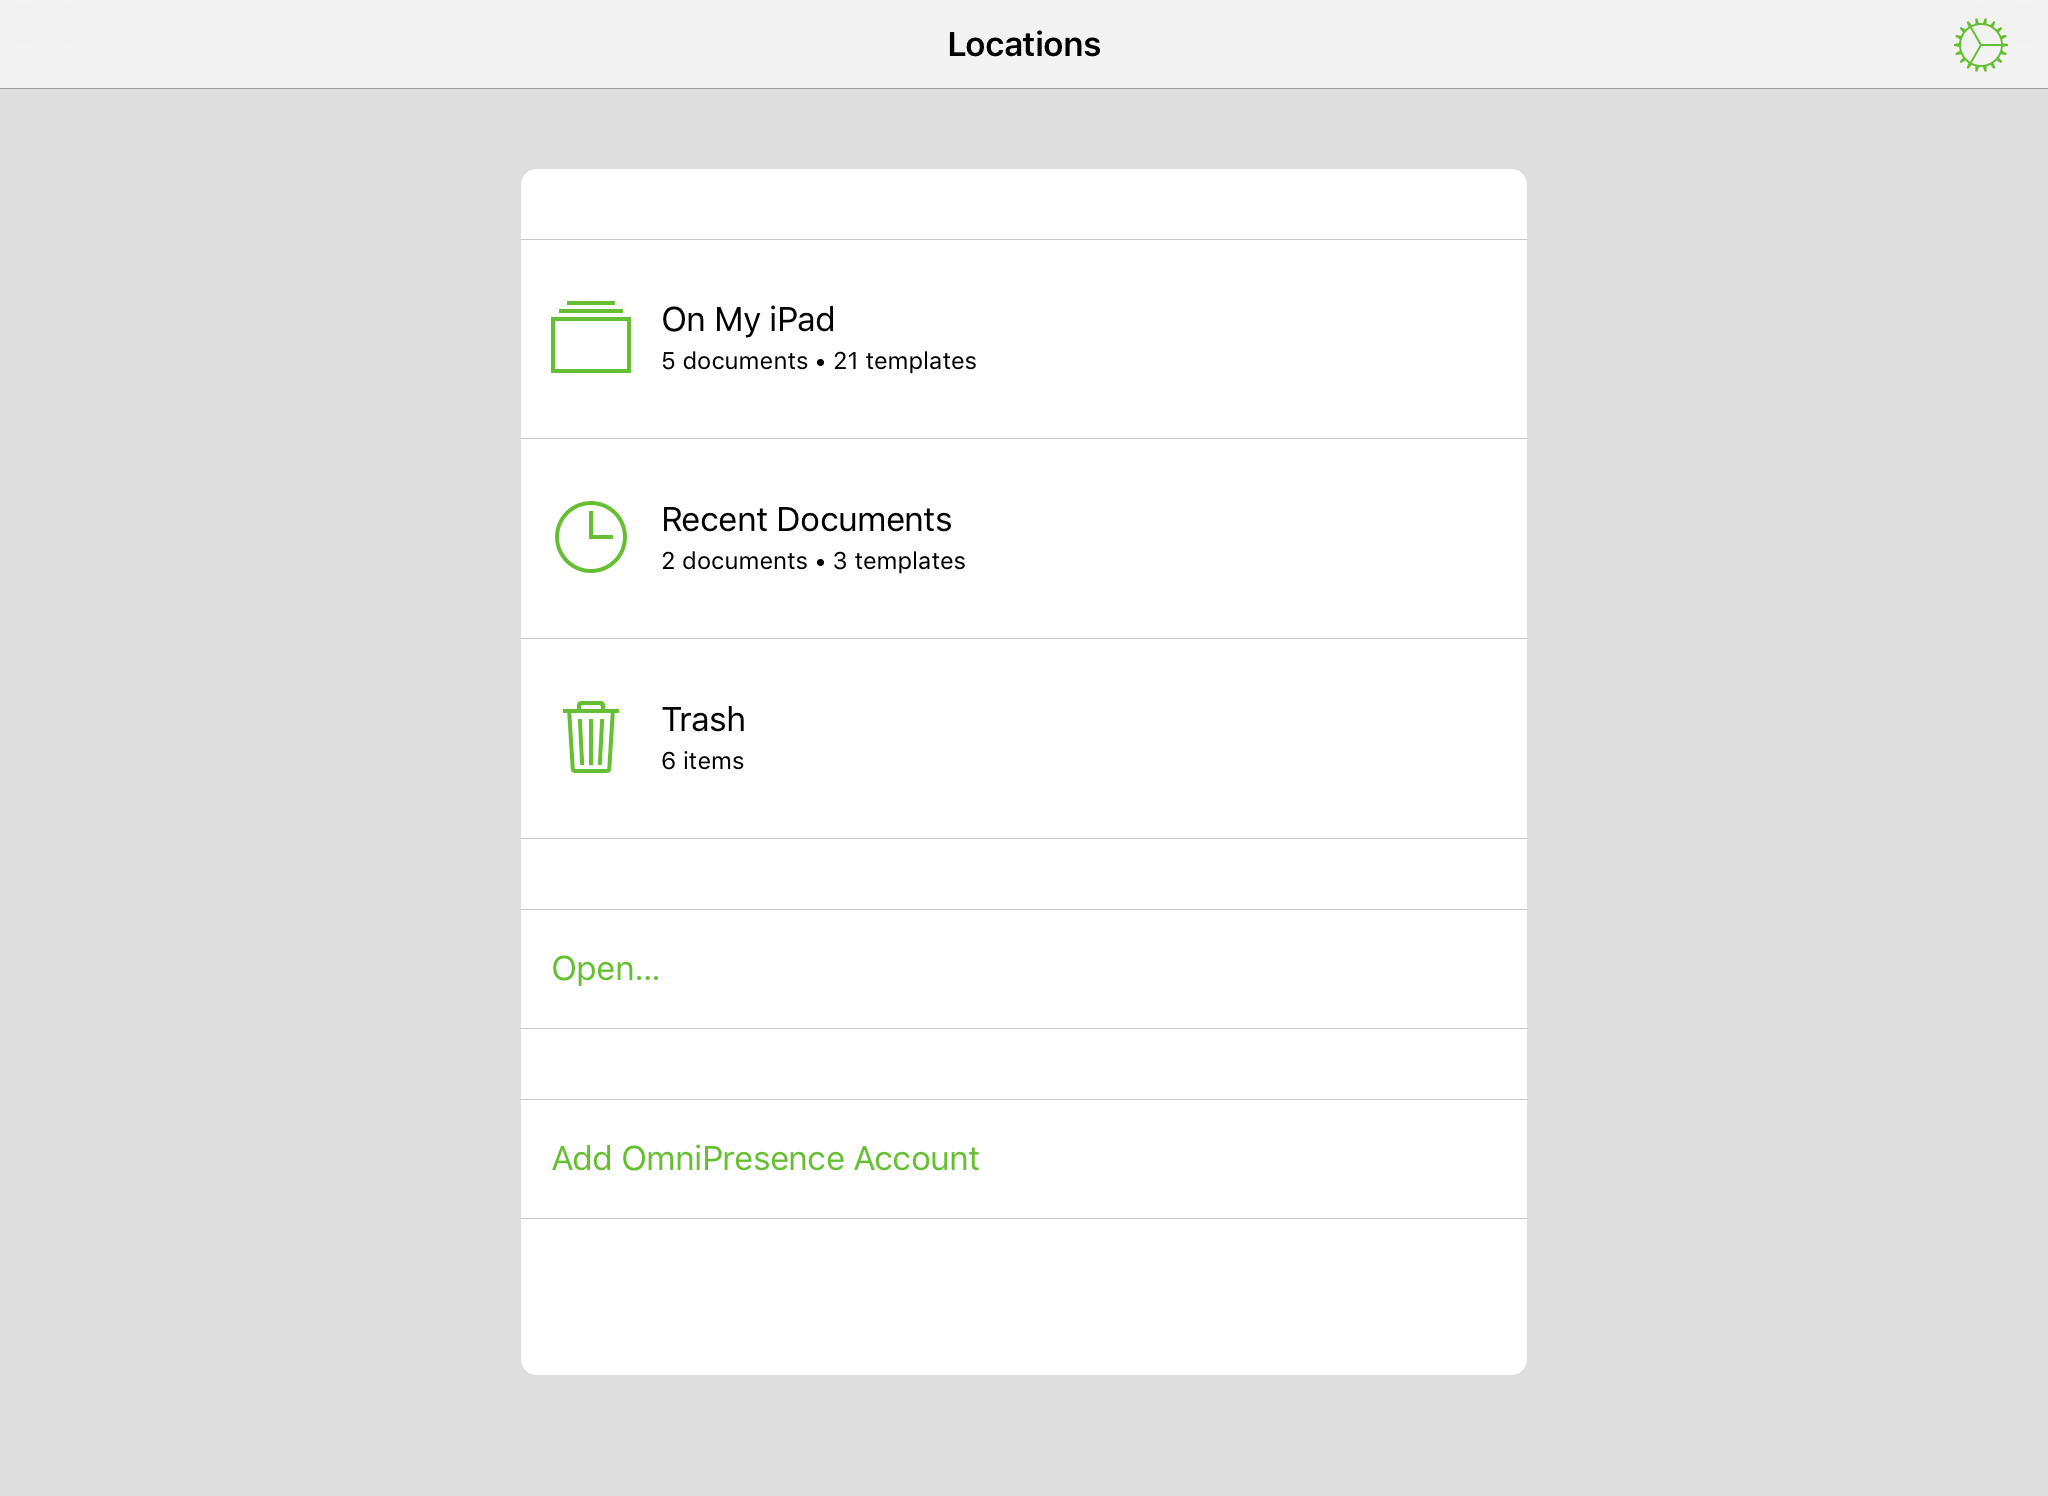 The Locations screen is the first thing you see after launching OmniGraffle